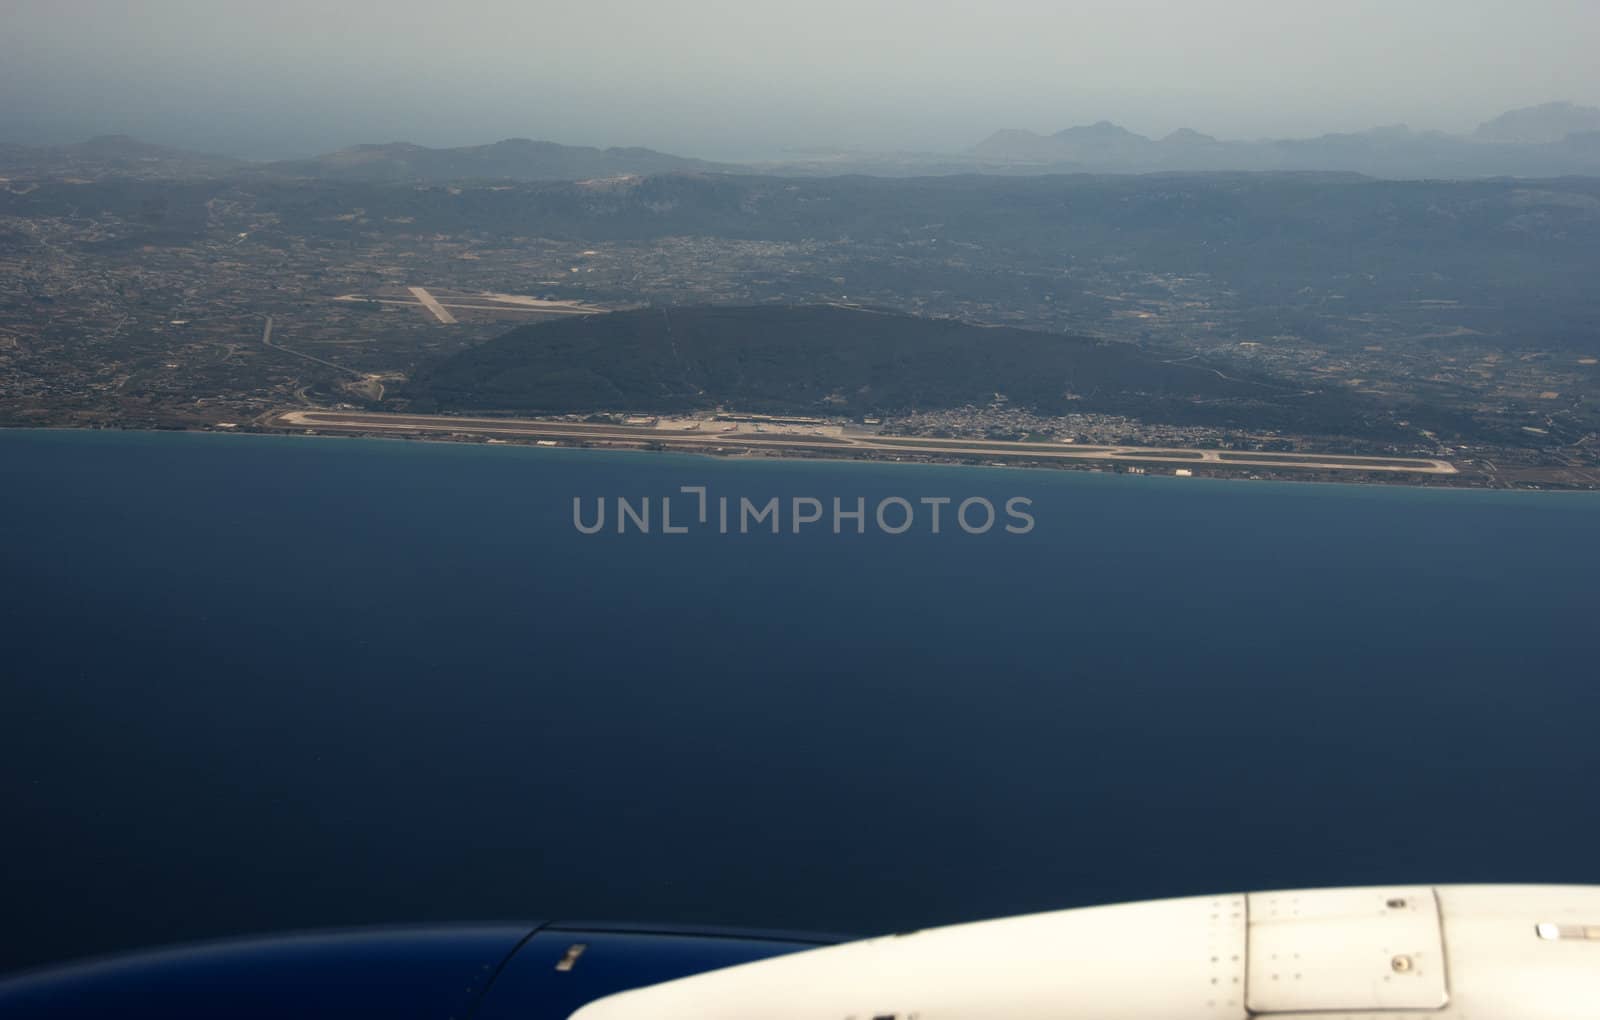 view on rhodos from the airplane by compuinfoto